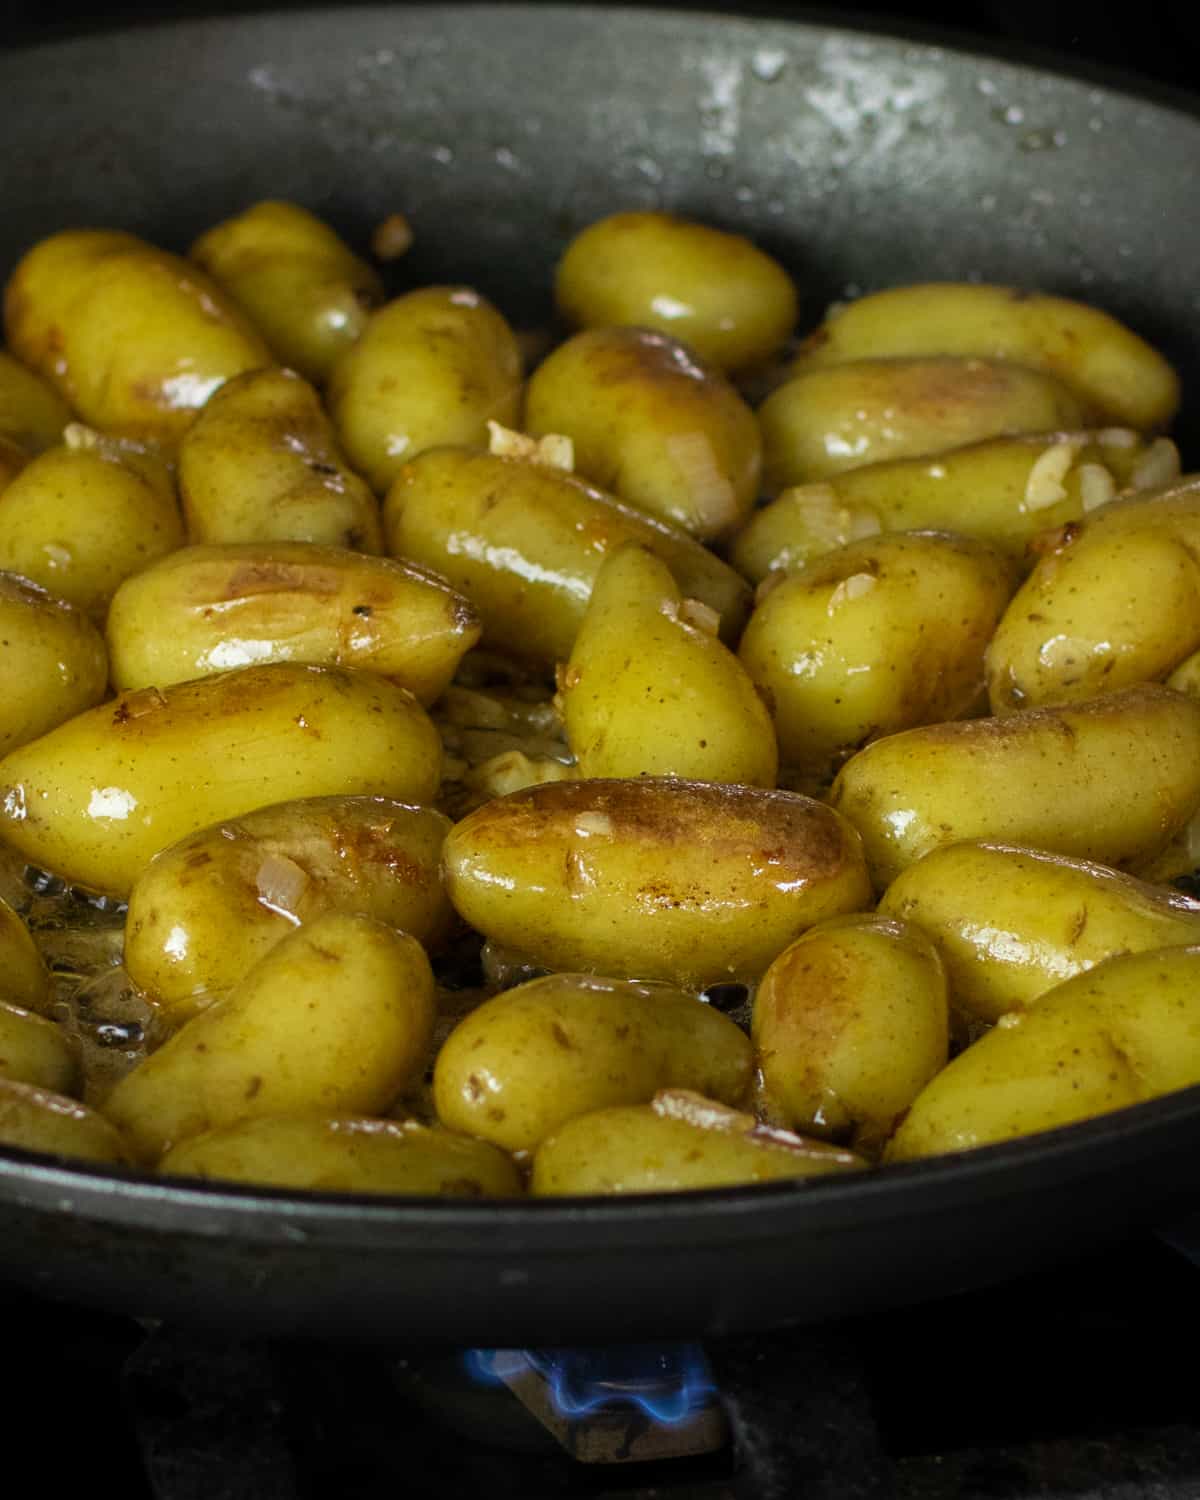 Boiled mini potatoes added to the frying pan with shallot and garlic.